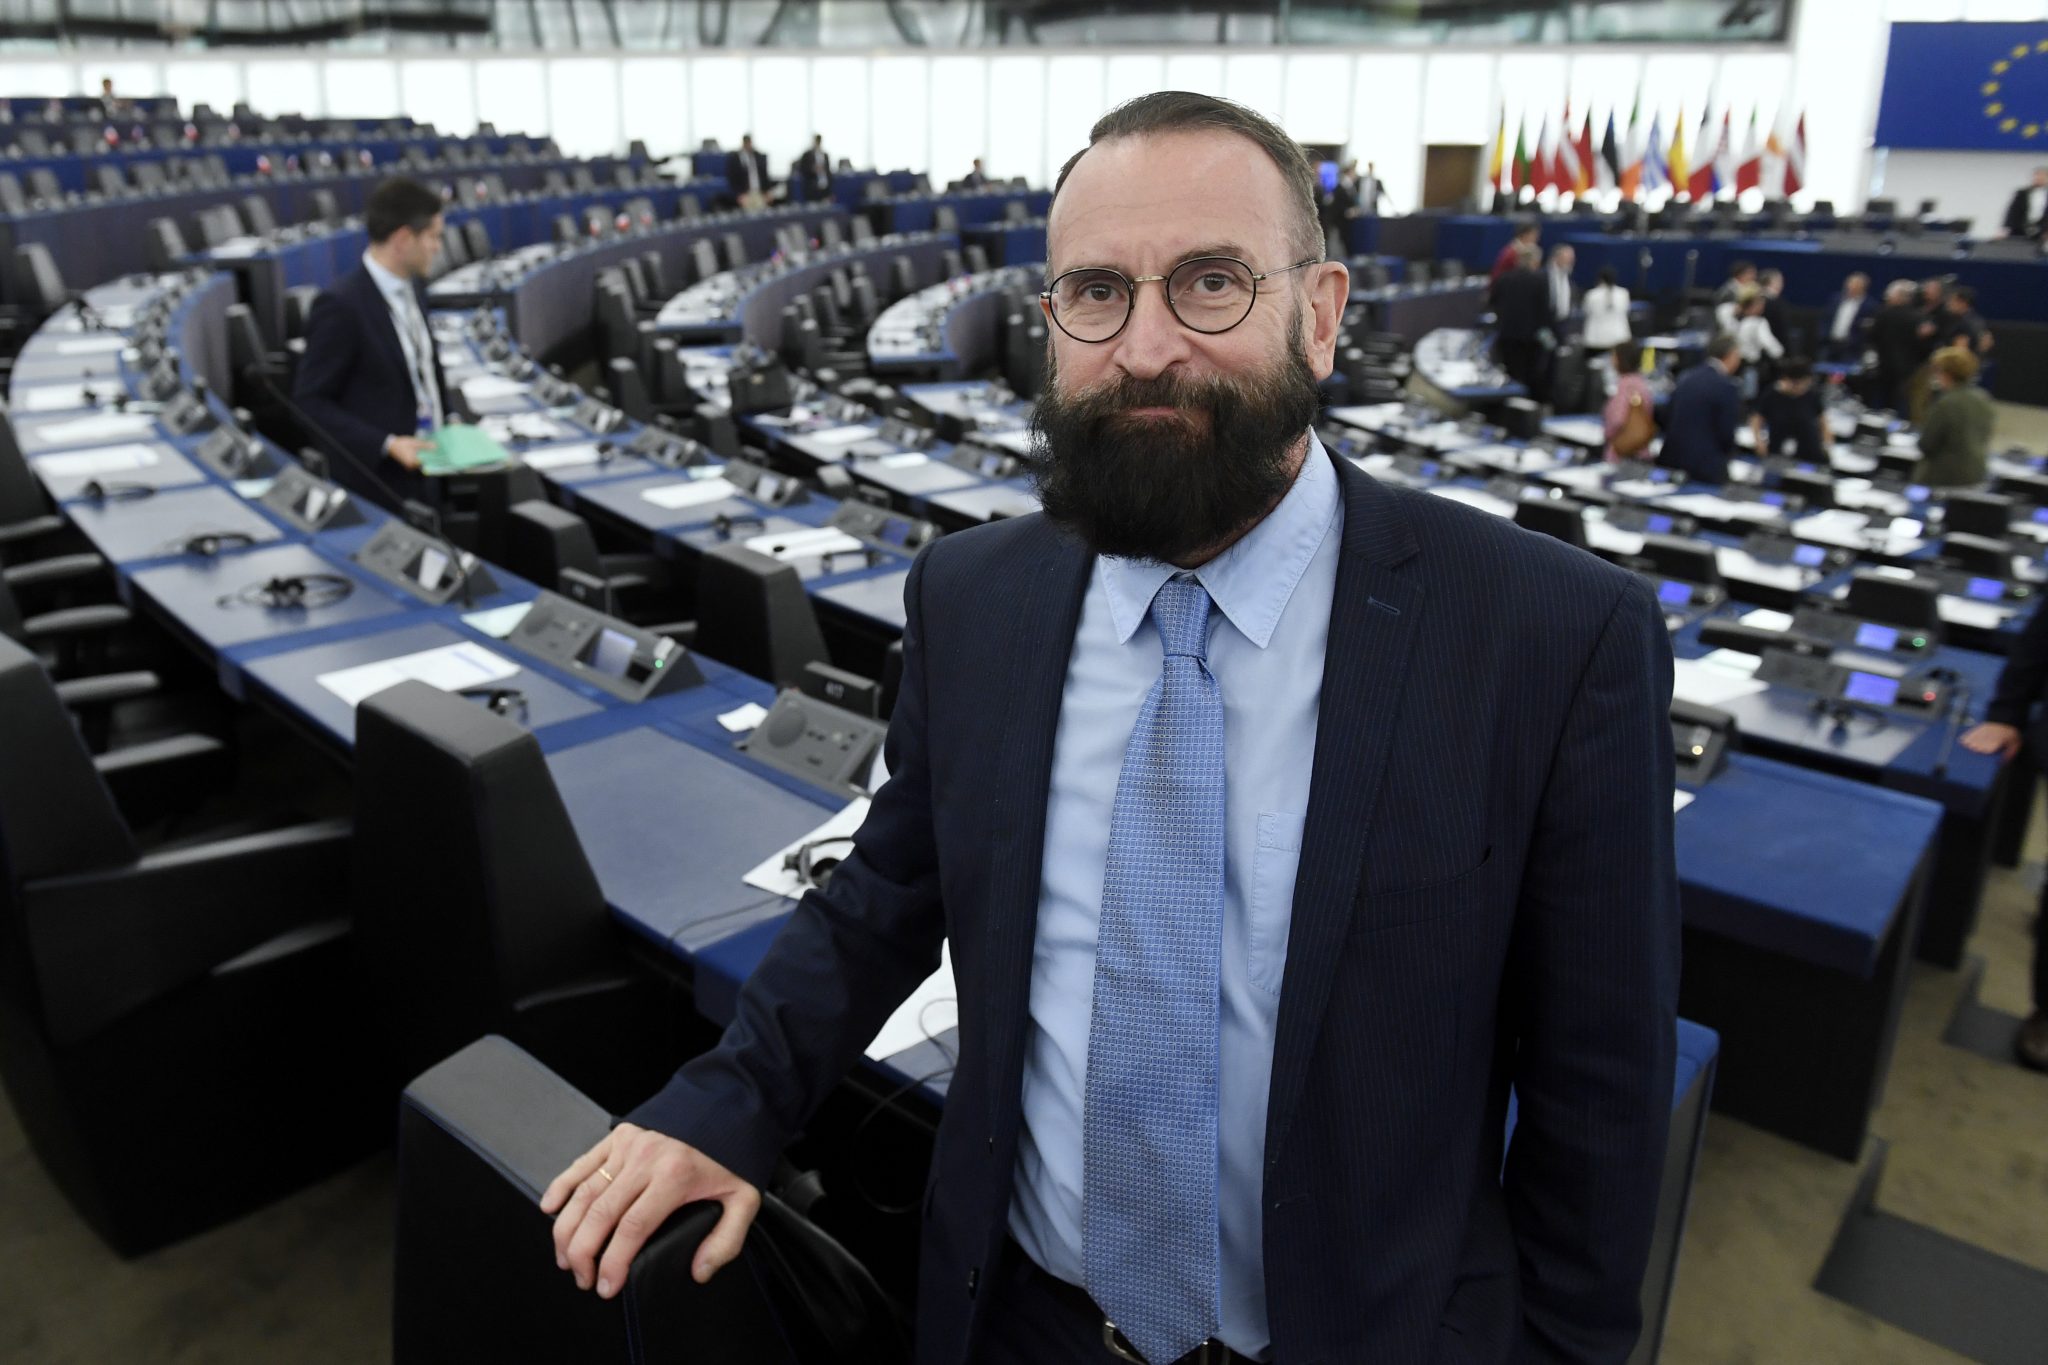 Fidesz MEP Szájer's Sudden Resignation Due to Illegal Party Scandal and Police Raid